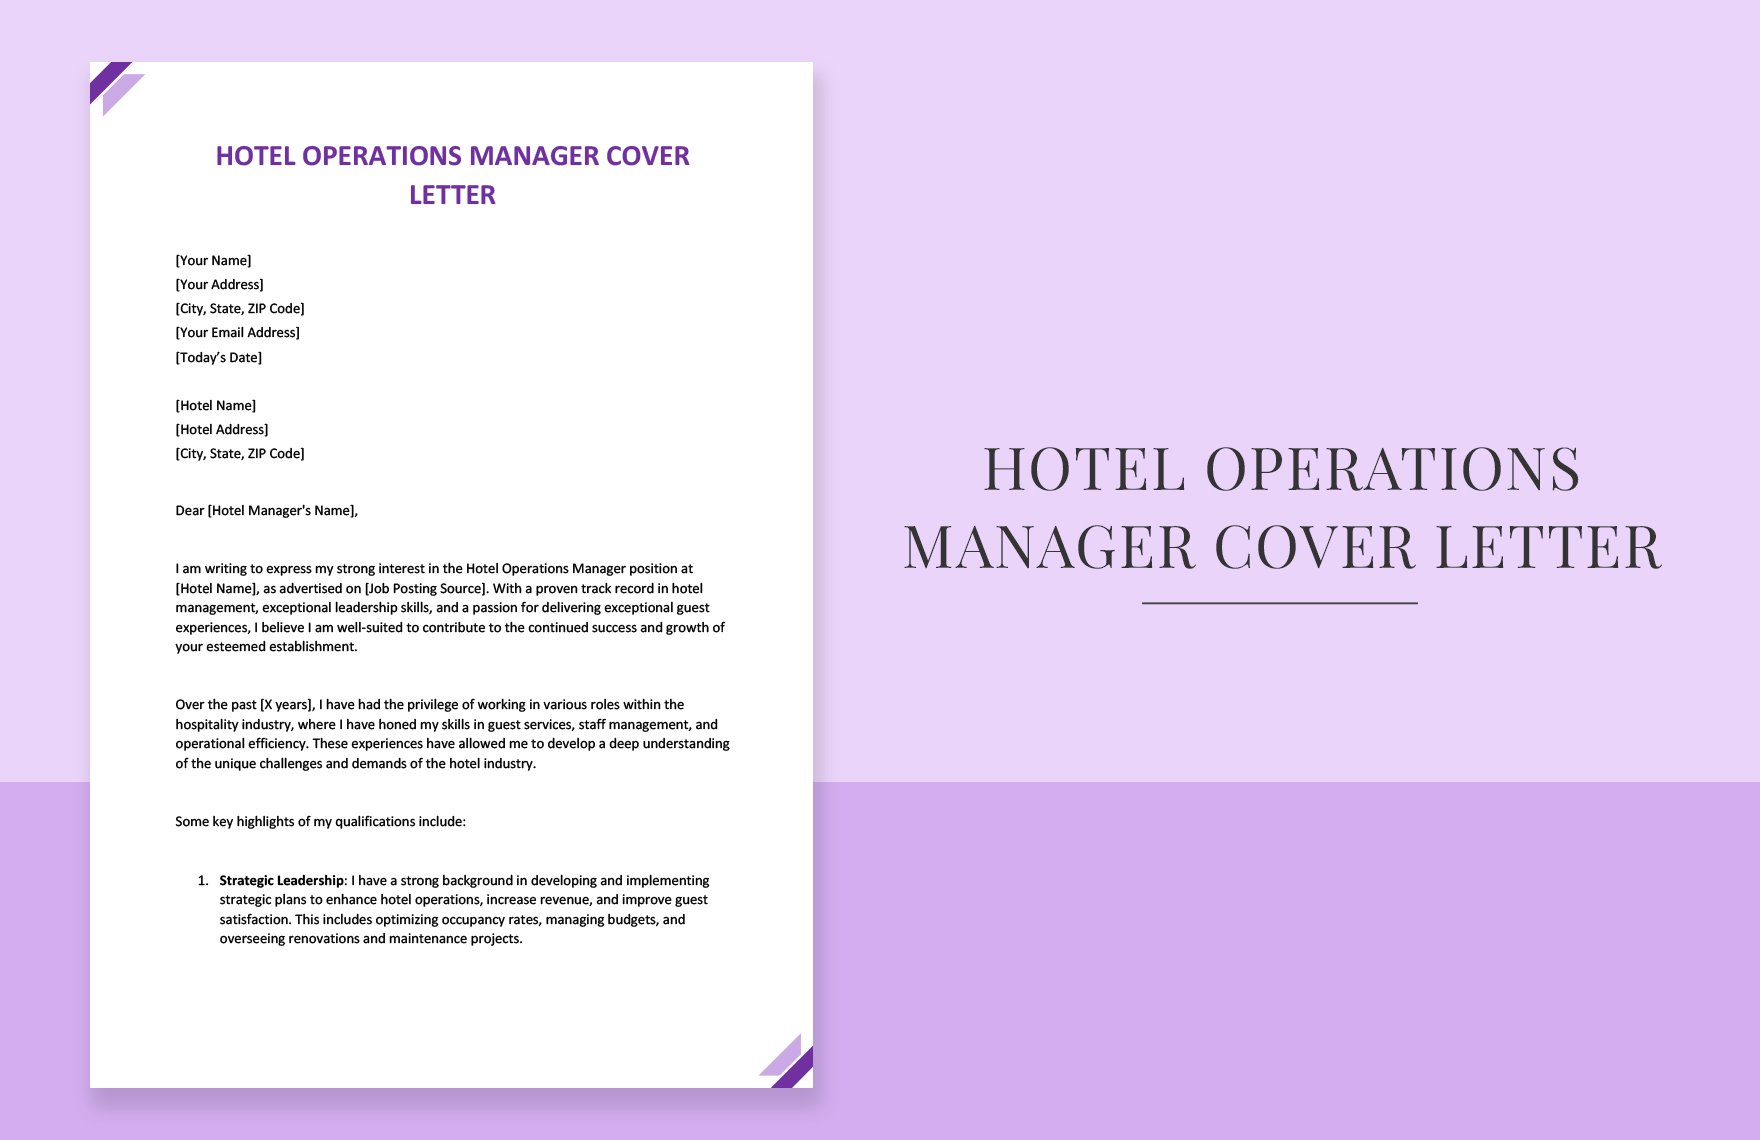 Hotel Operations Manager Cover Letter